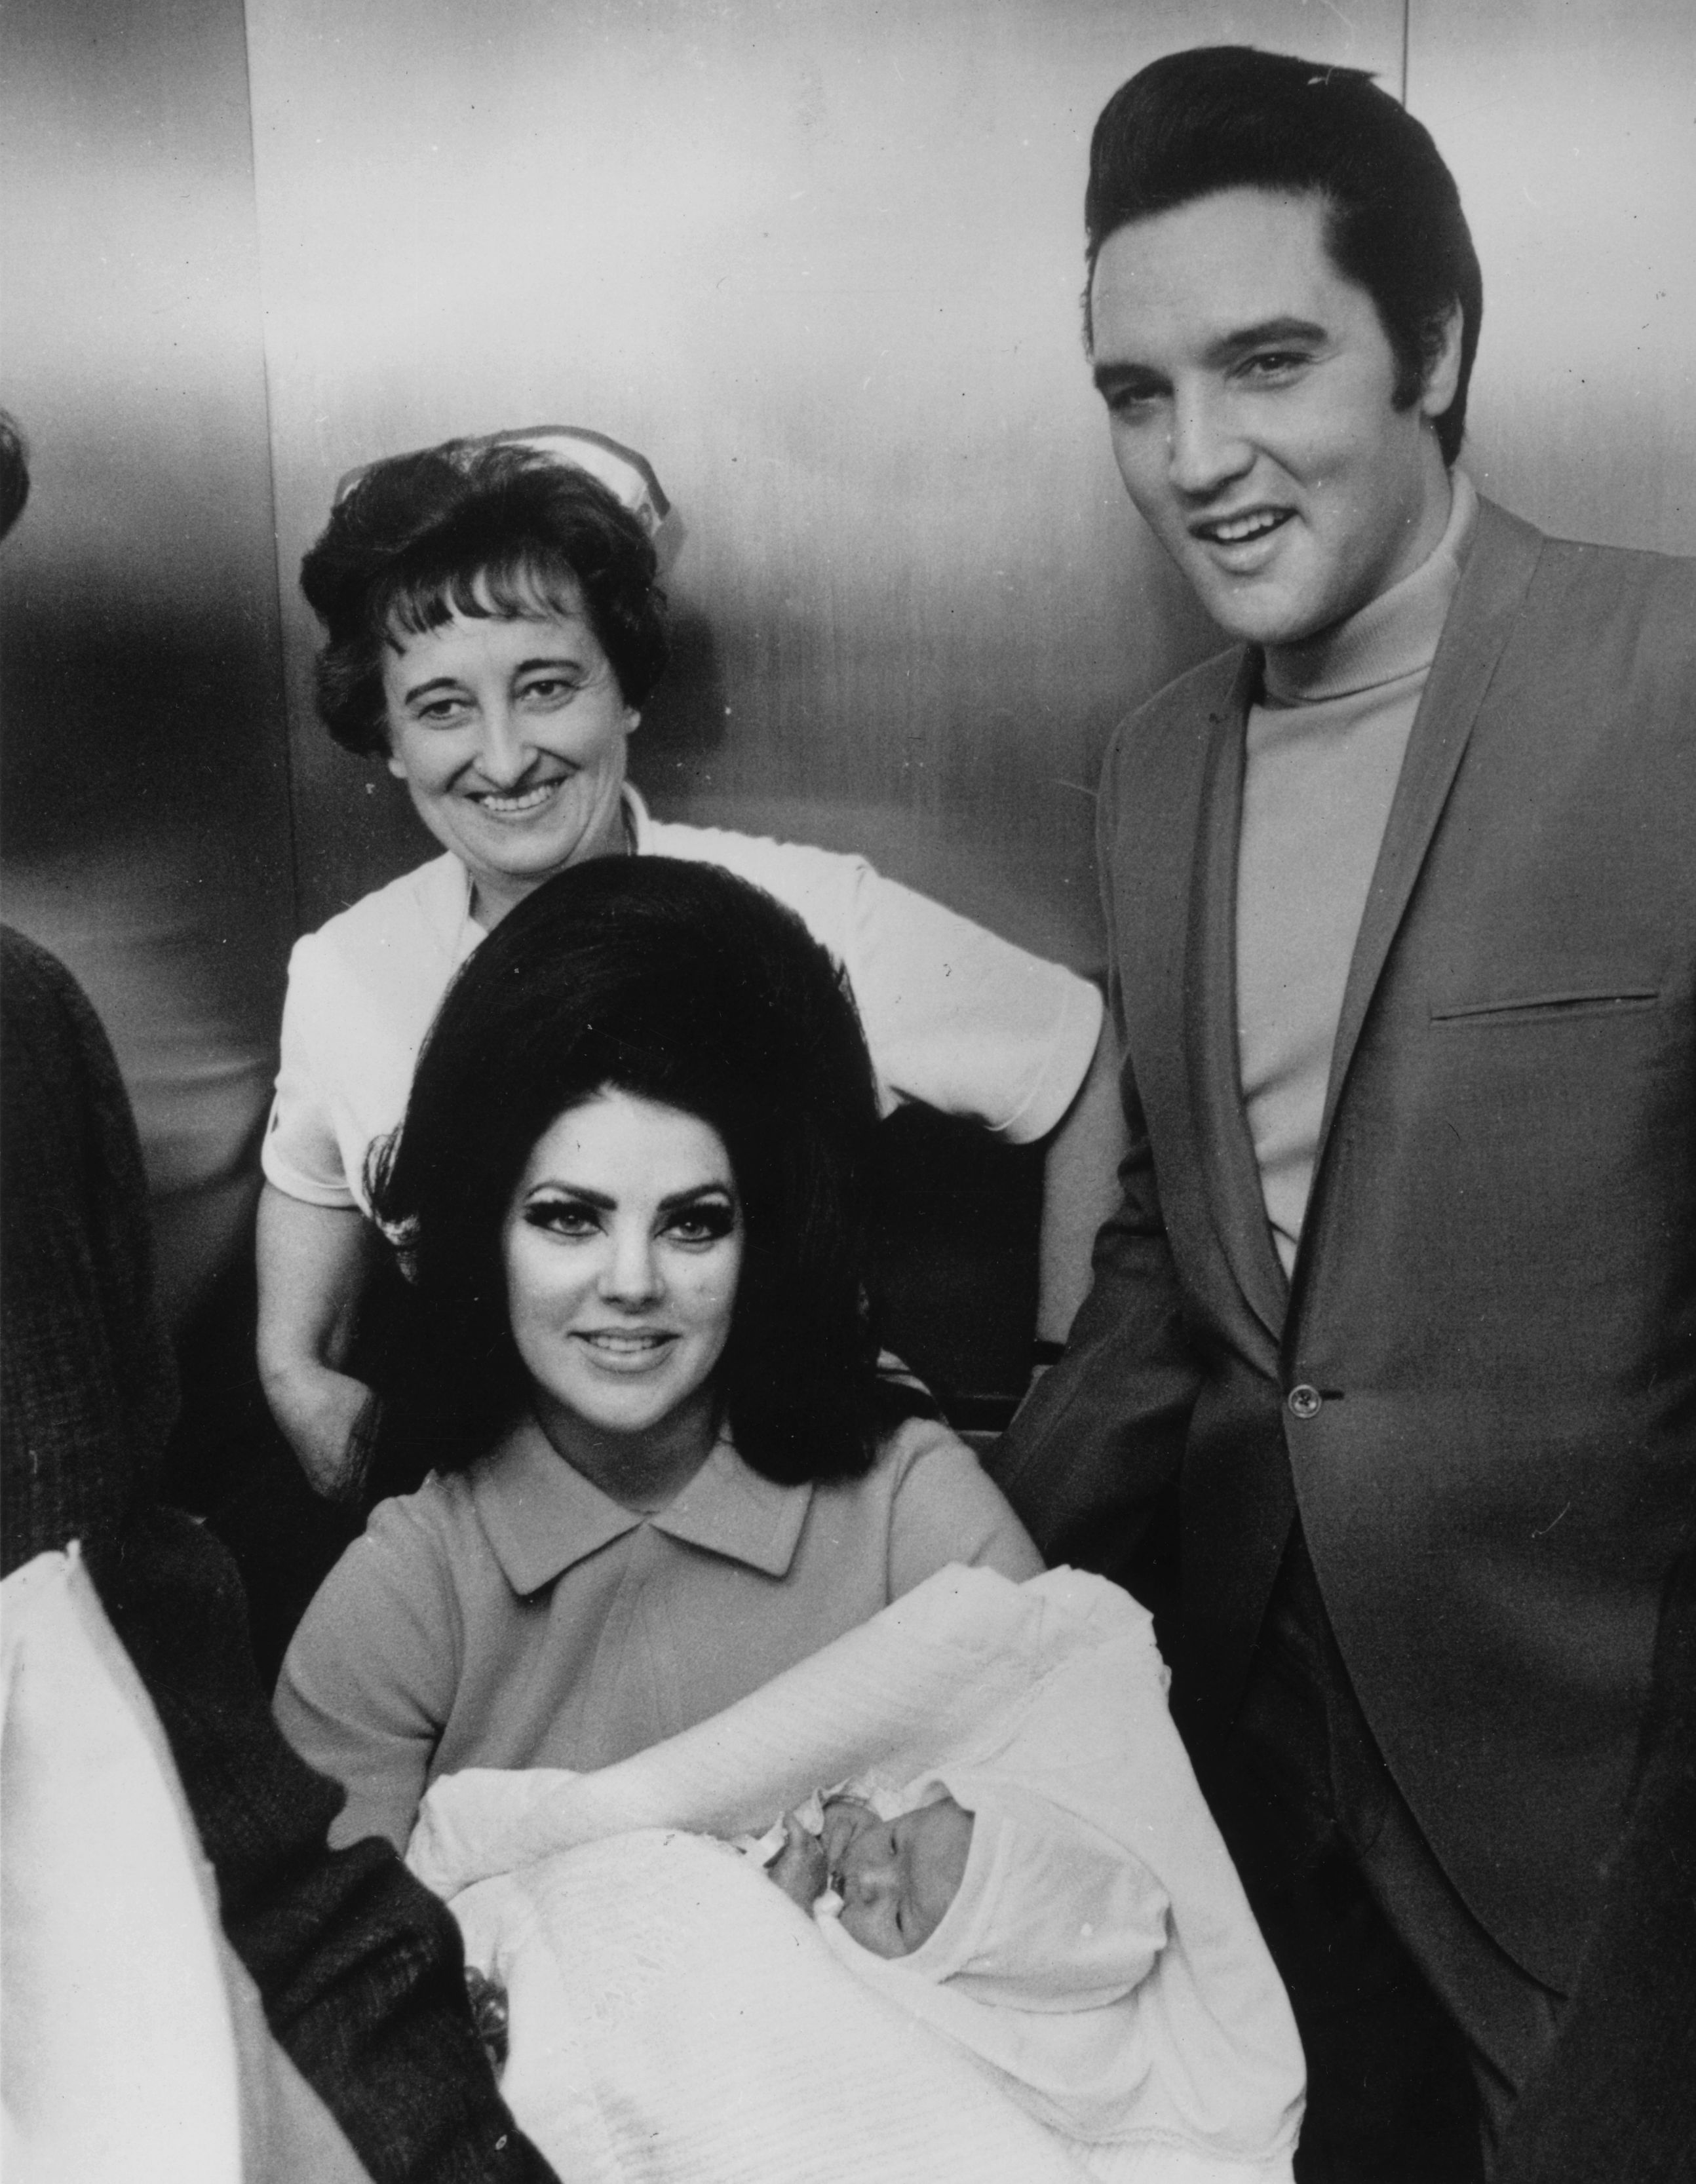 Rock 'n' roll superstar Elvis Presley (1935 - 1977), with his wife Priscilla and their new-born baby Lisa Marie, at the Baptist Hospital at Memphis, Tennessee